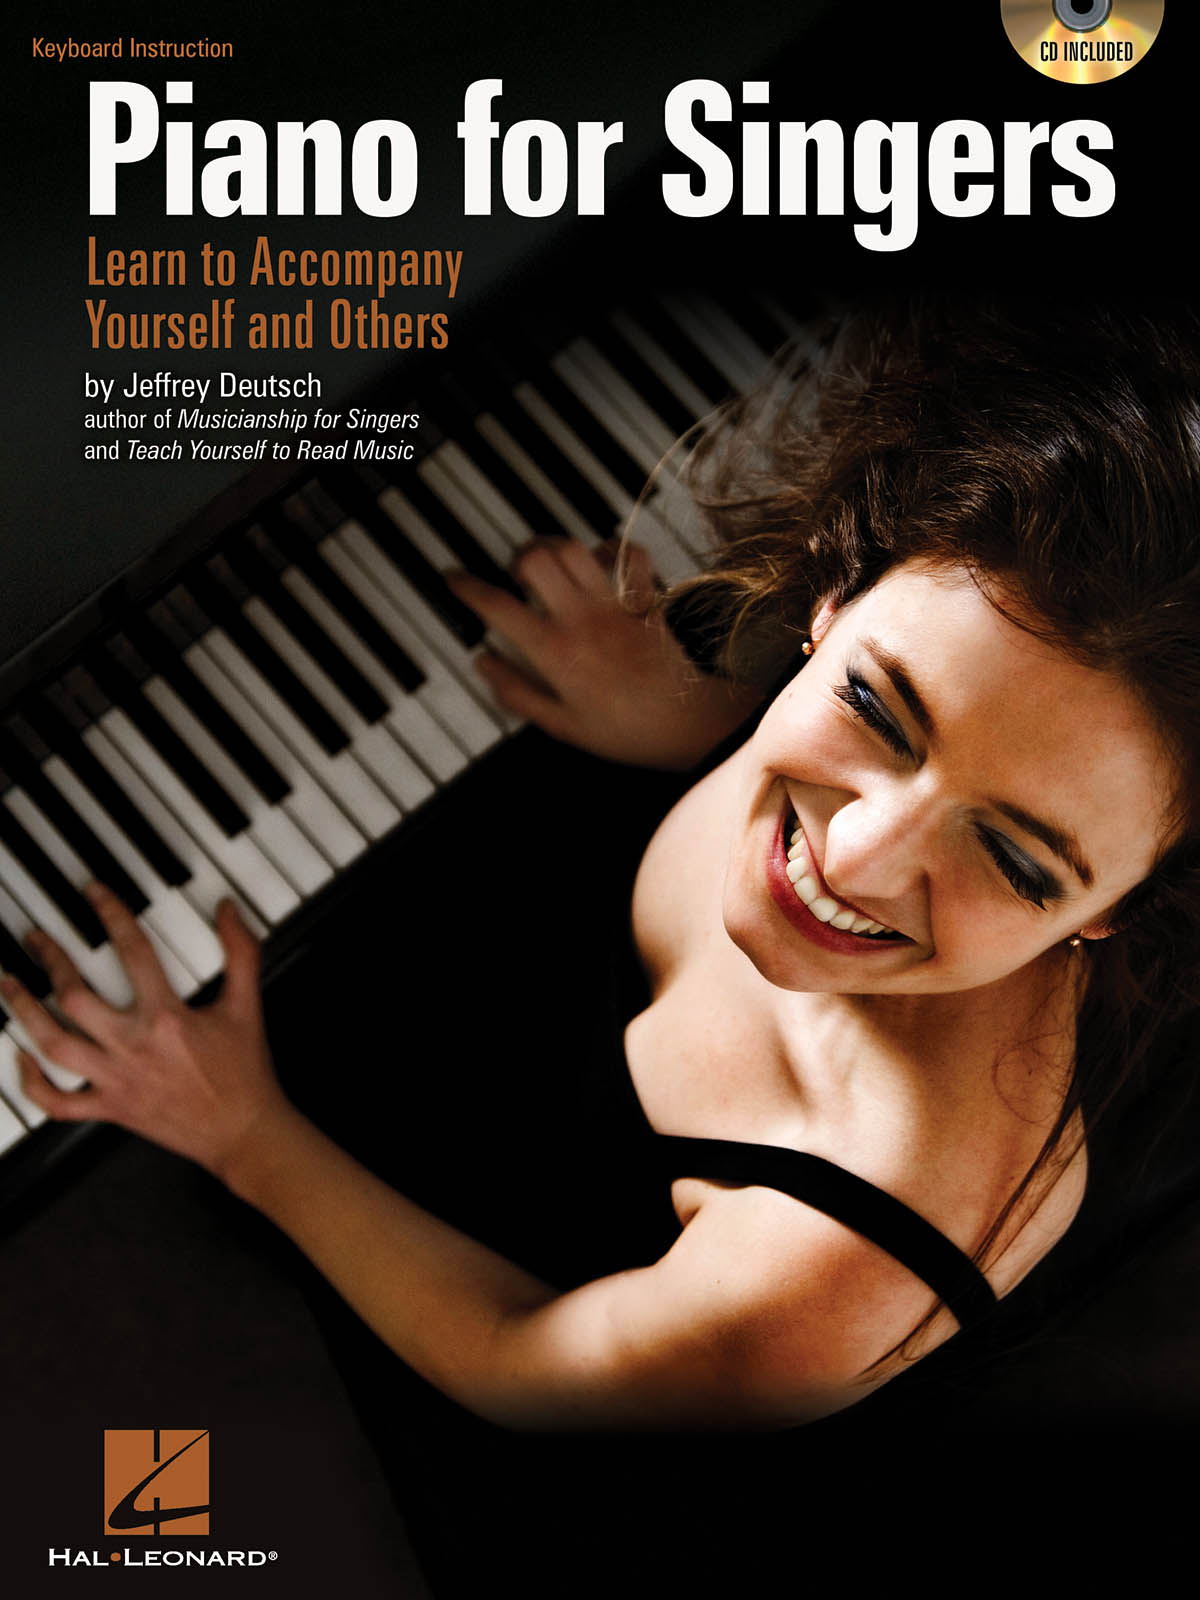 Piano fuer Singers-Learn to Acc. Yourself&Others